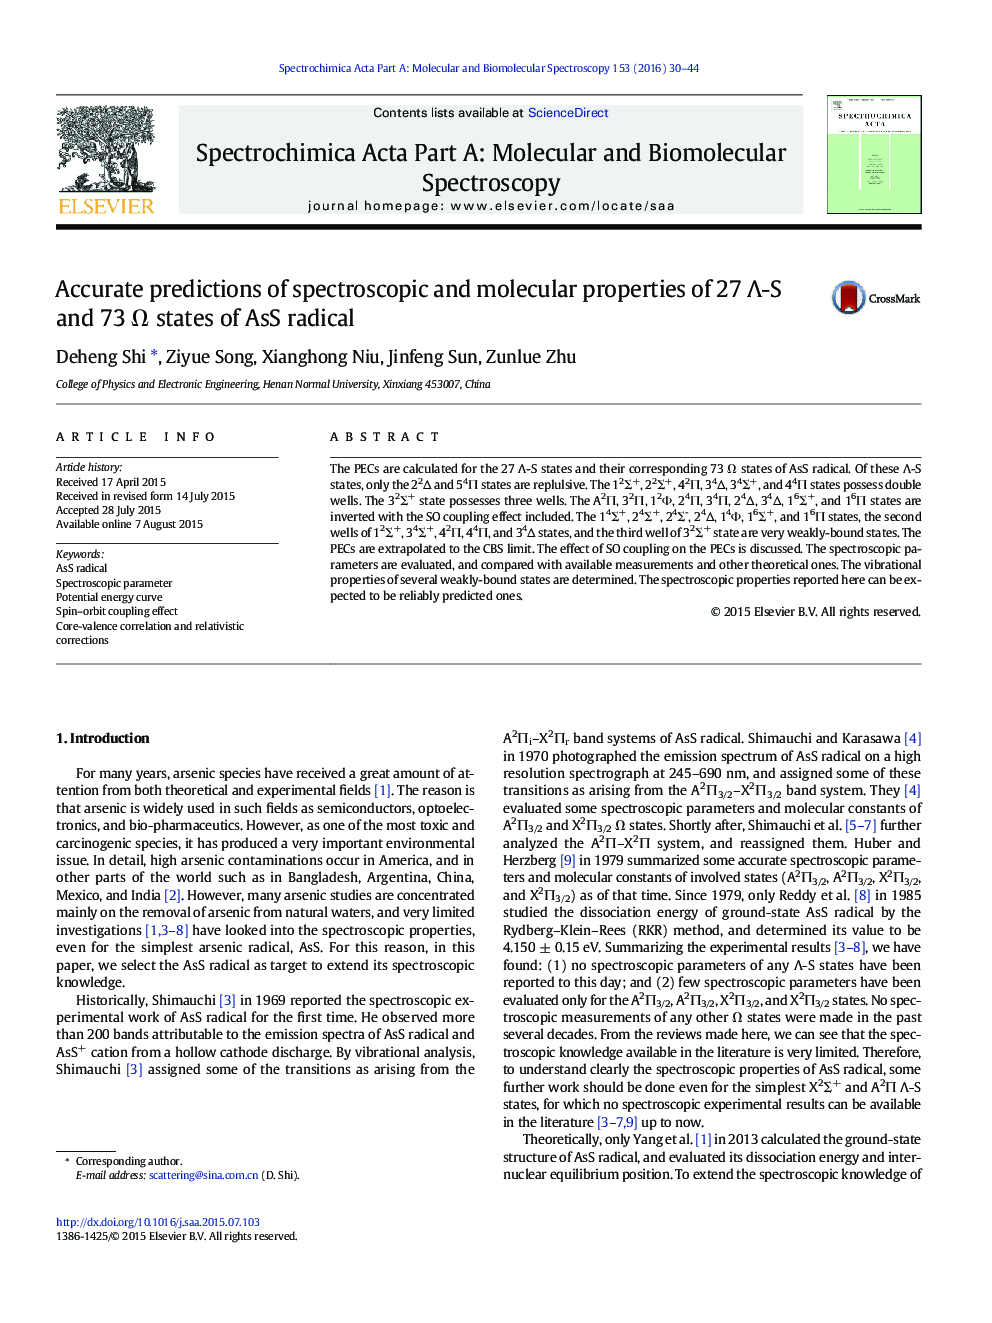 Accurate predictions of spectroscopic and molecular properties of 27 Λ-S and 73 Ω states of AsS radical